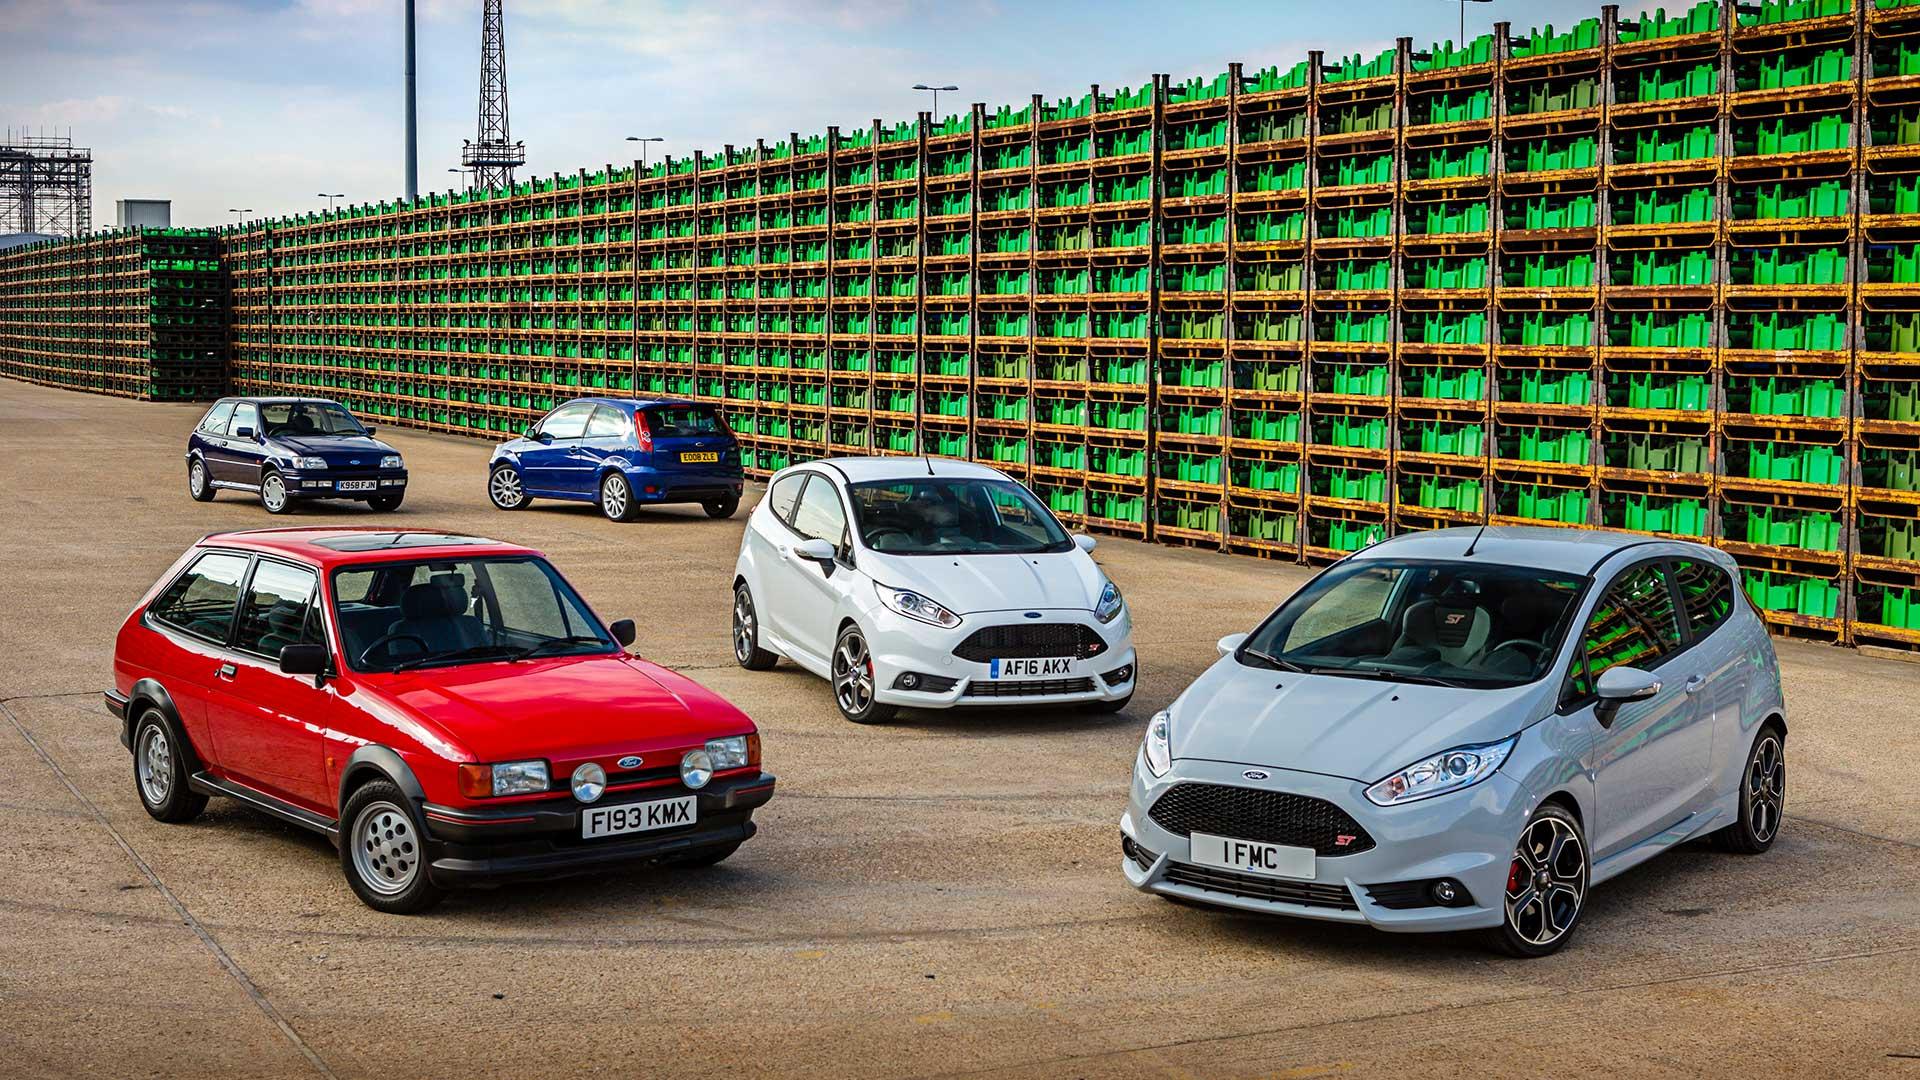 Unfortunately Production Of The Ford Fiesta Stopped After 47 Years Uk